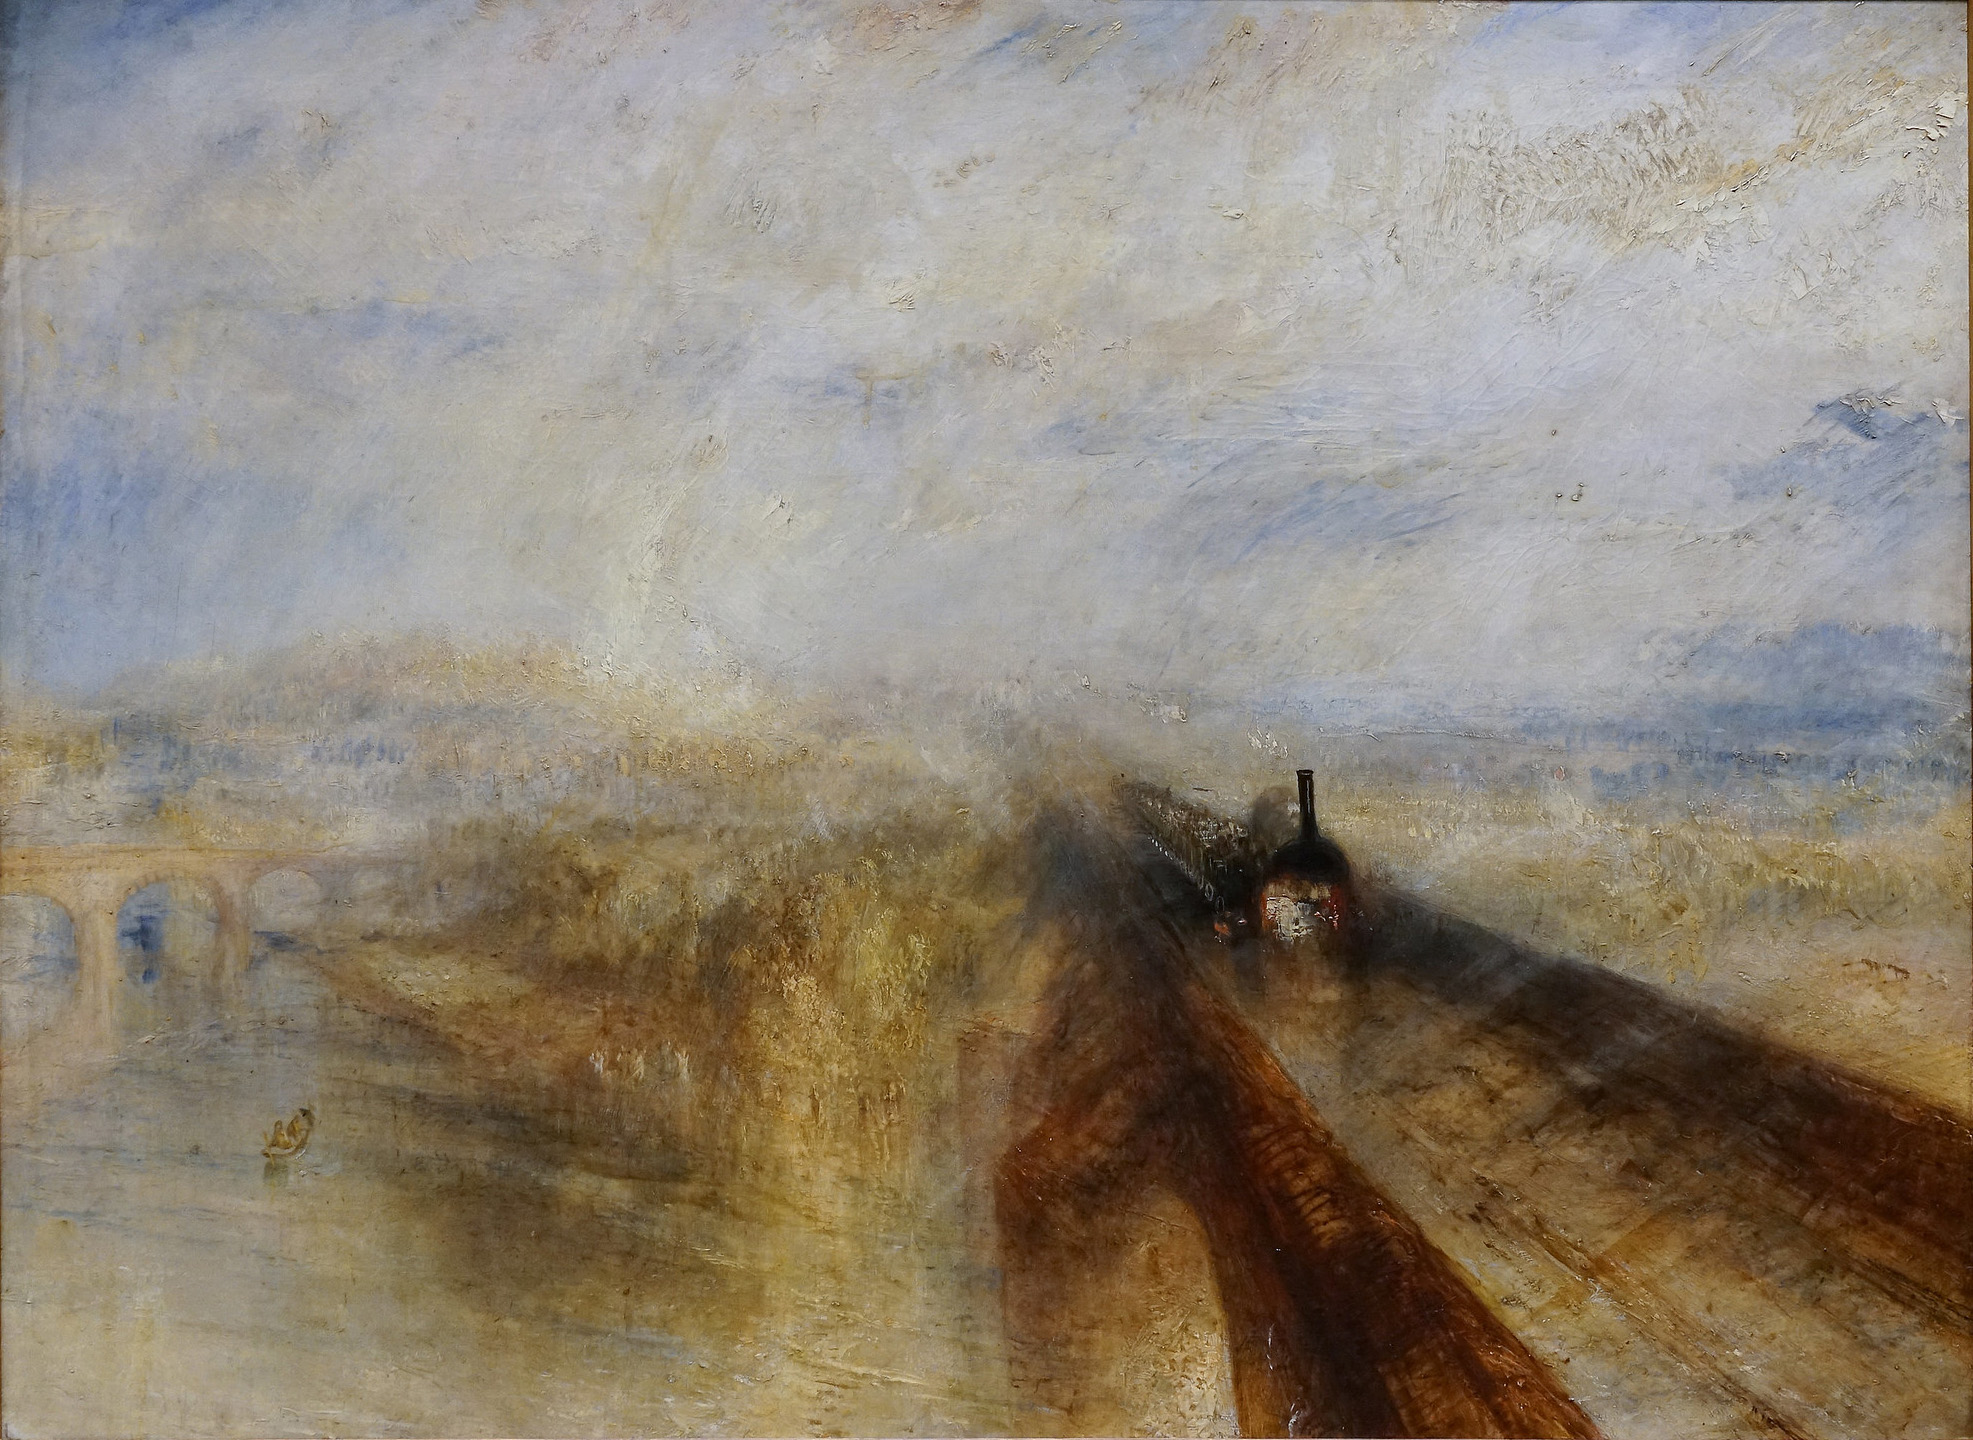 Joseph Mallord William Turner, Rain, Steam, and Speed — The Great Western Railway, oil on canvas, 1844 (National Gallery, London)